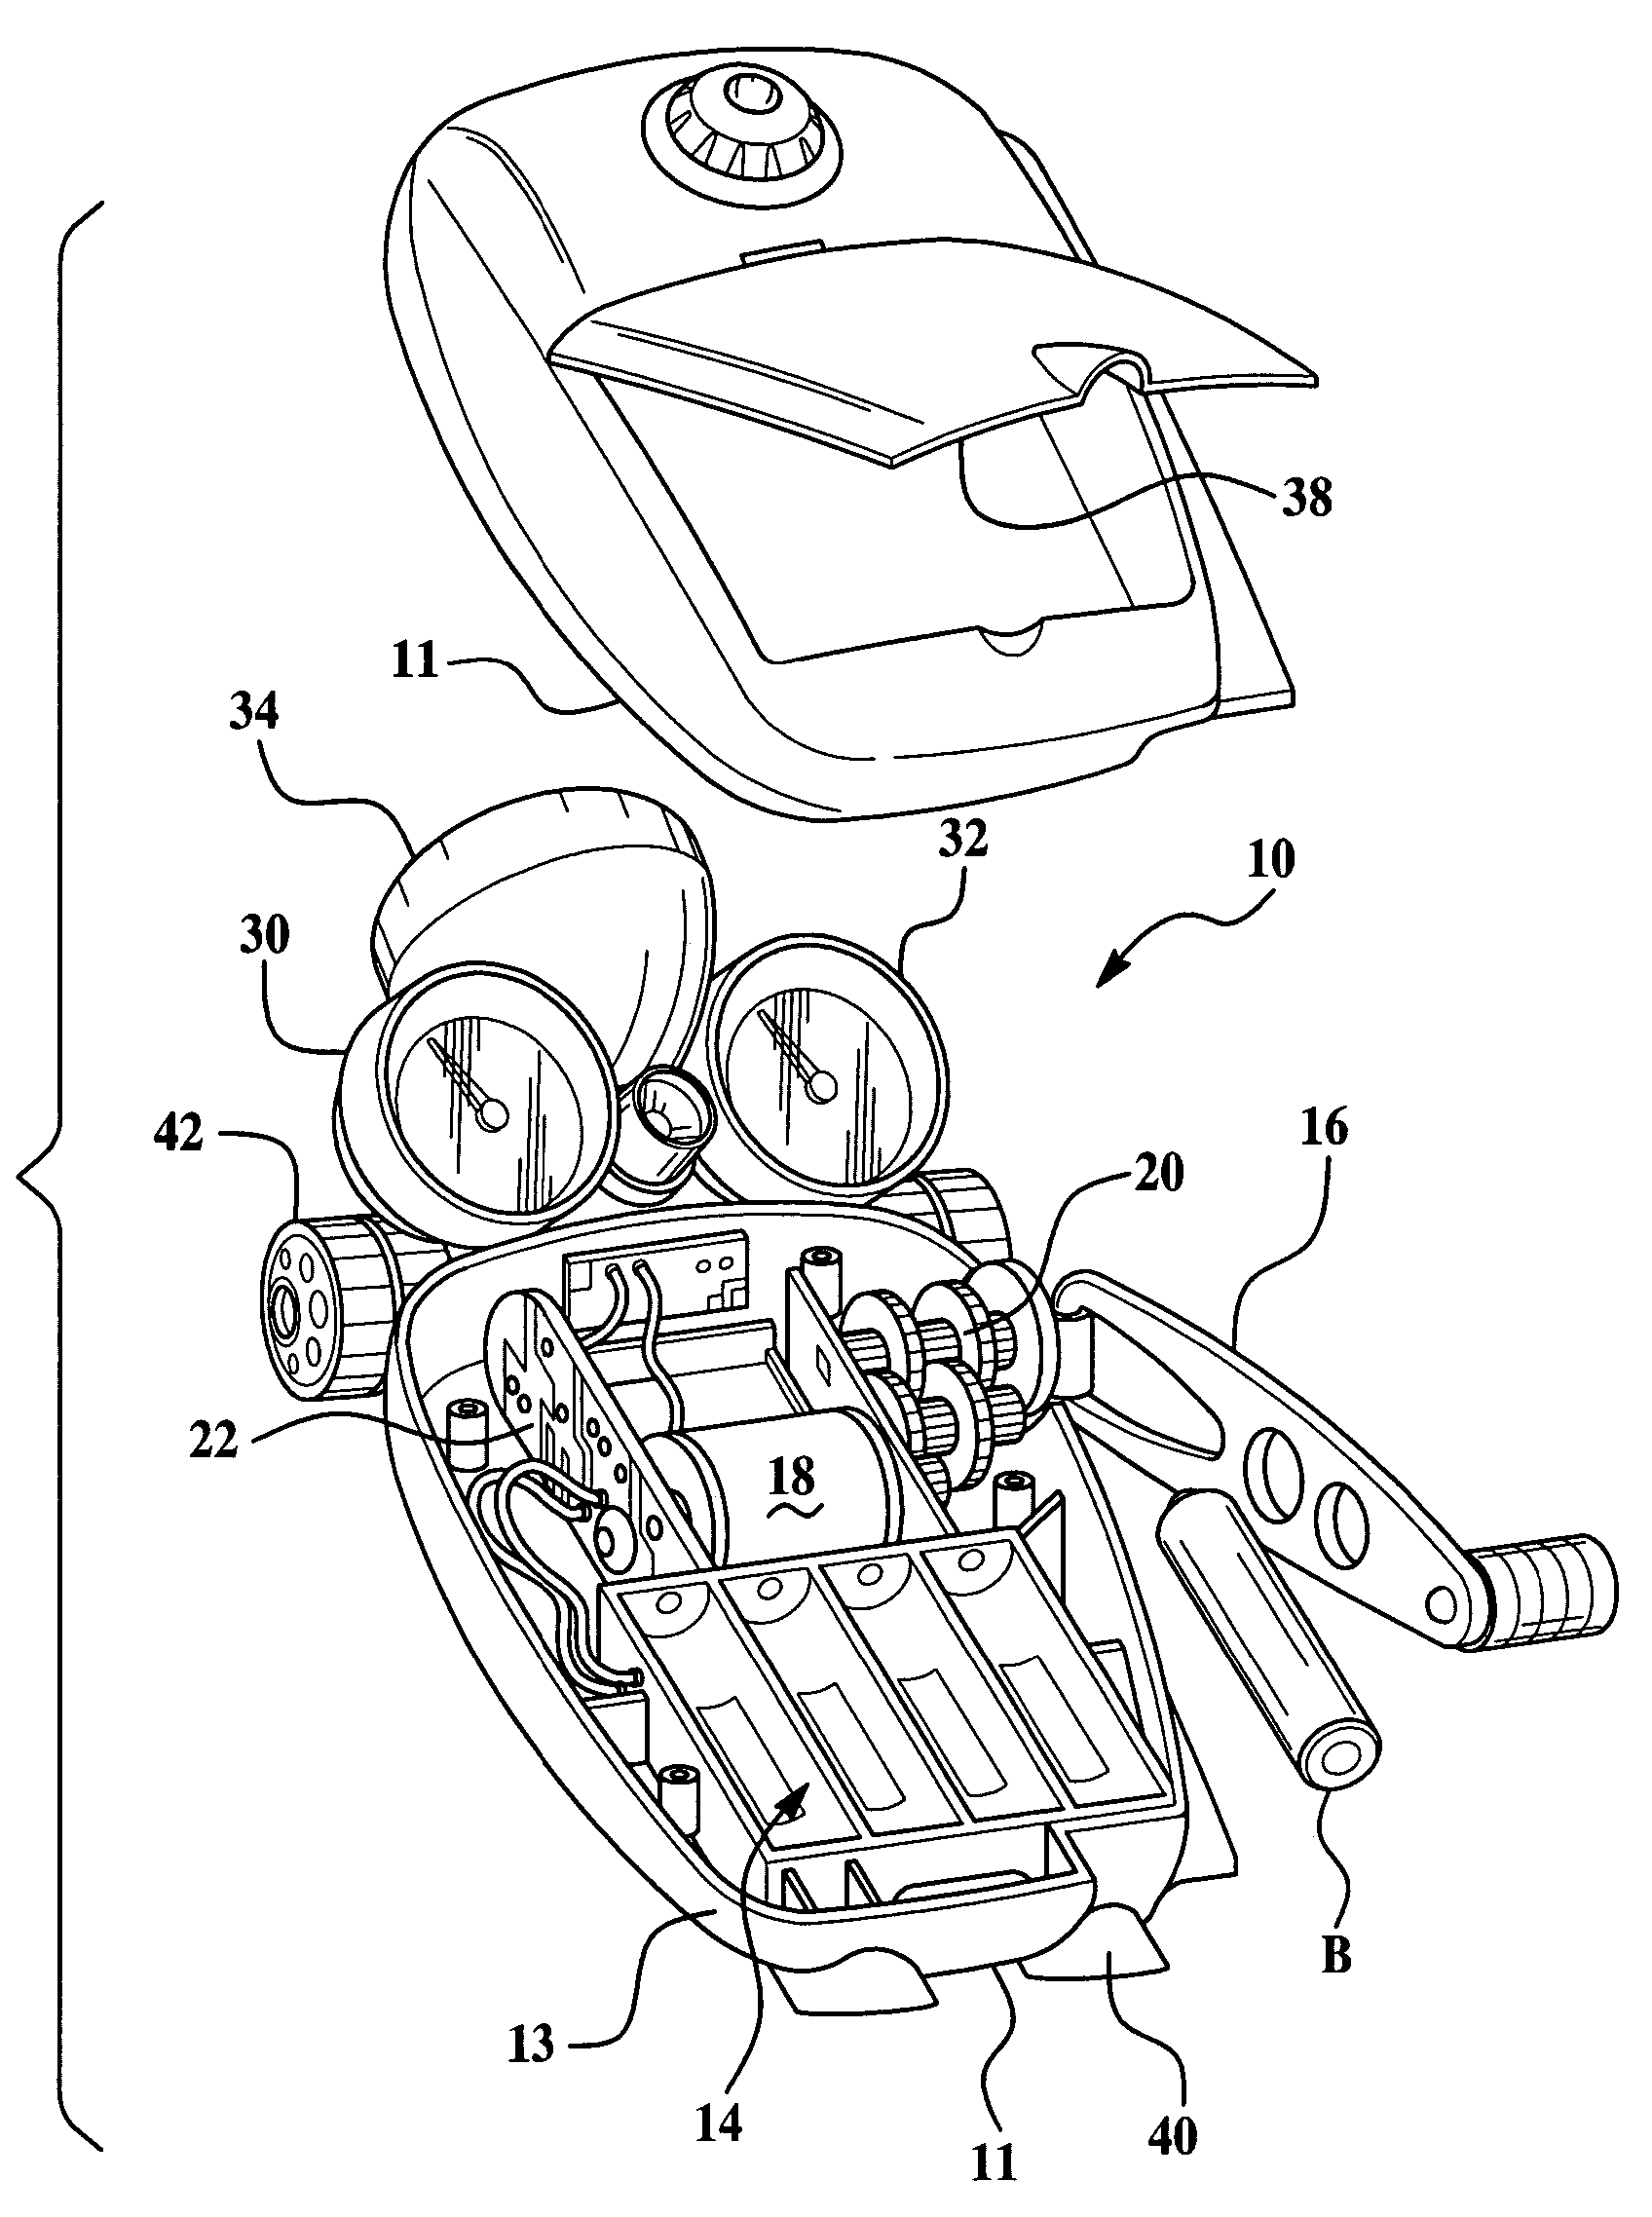 Amusement apparatus operative as a dynamo battery charger